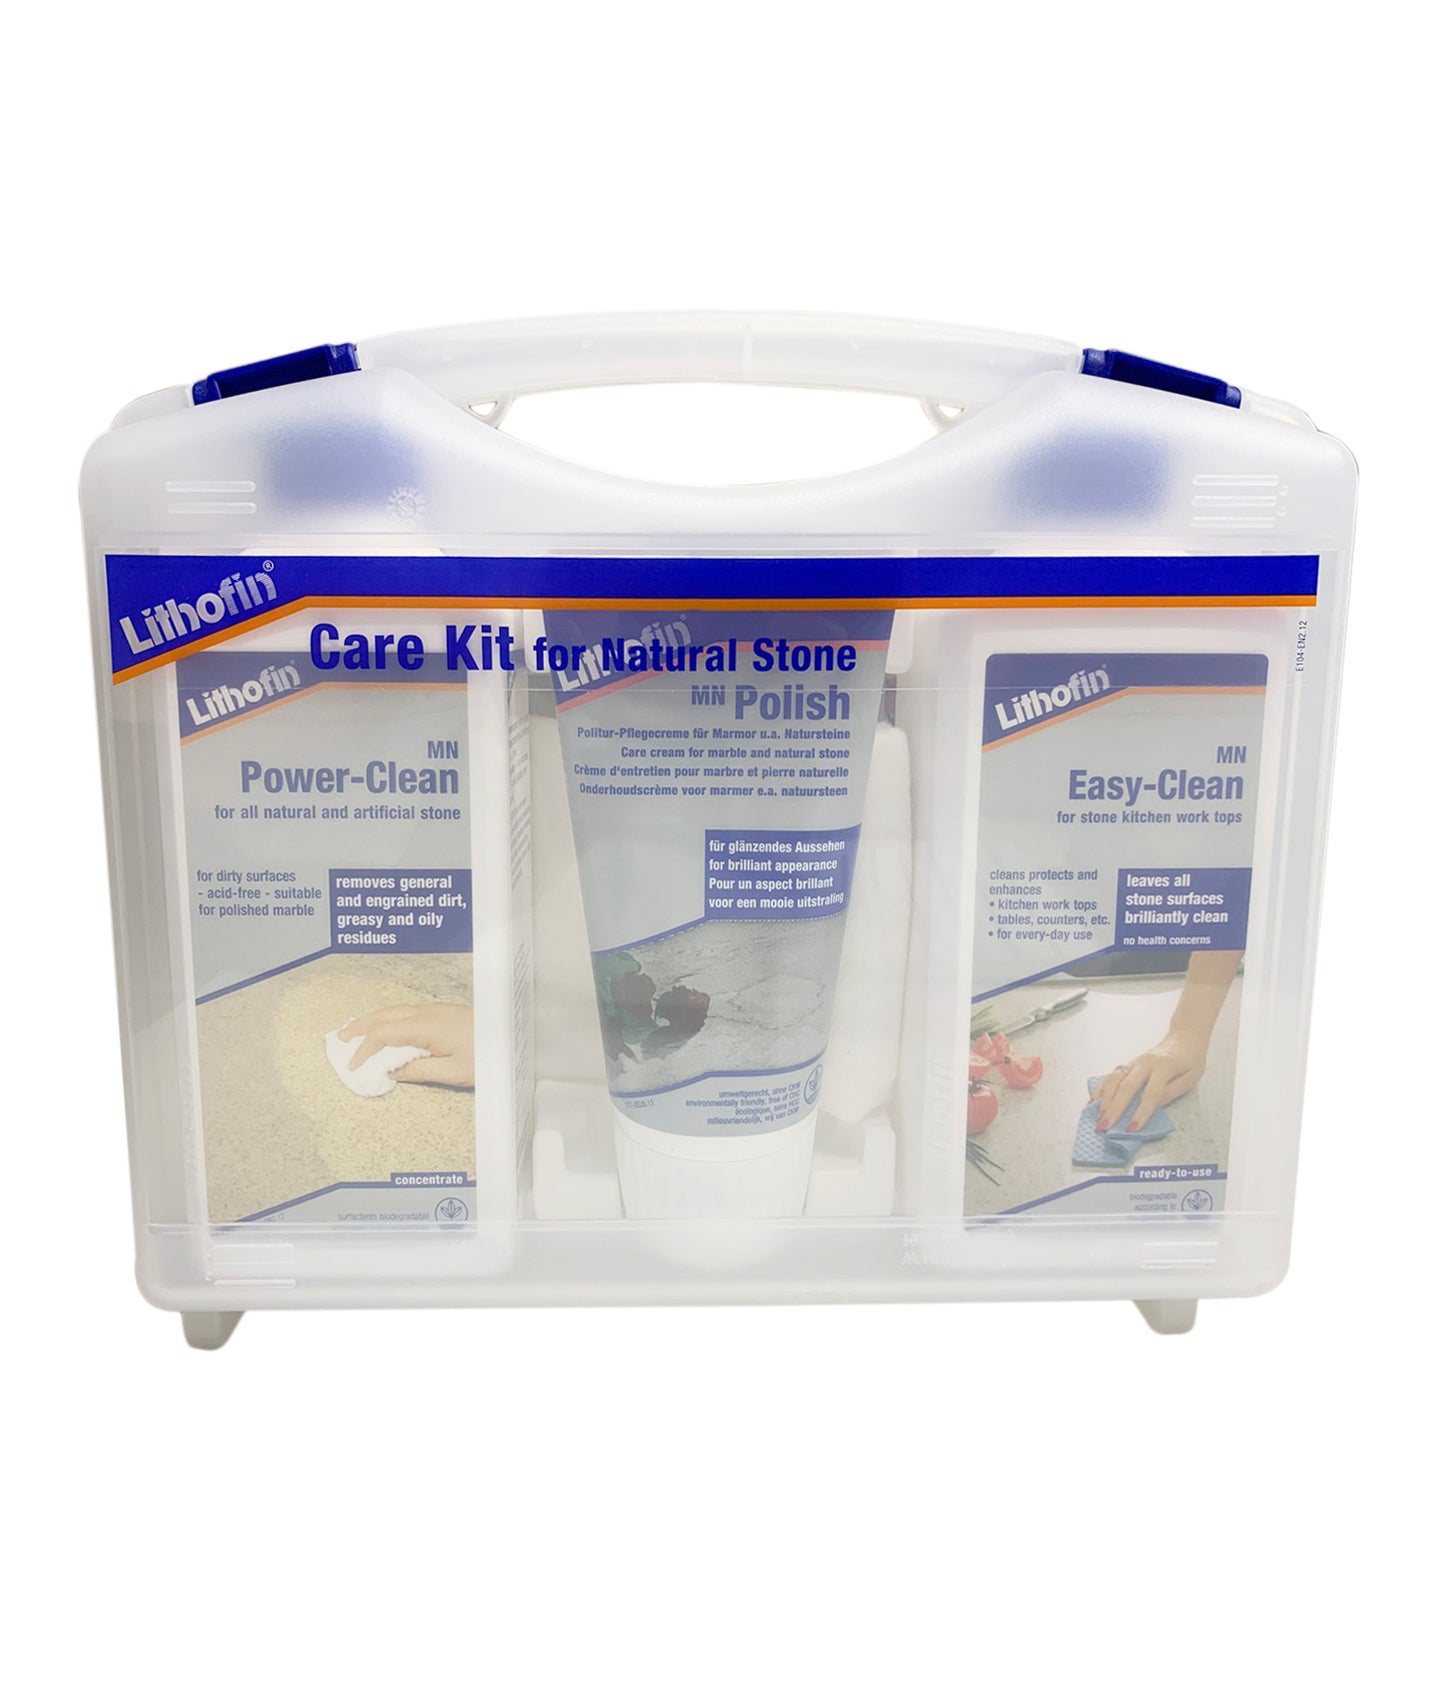 Lithofin Care Kit With Wax For Natural Stone Care - PE